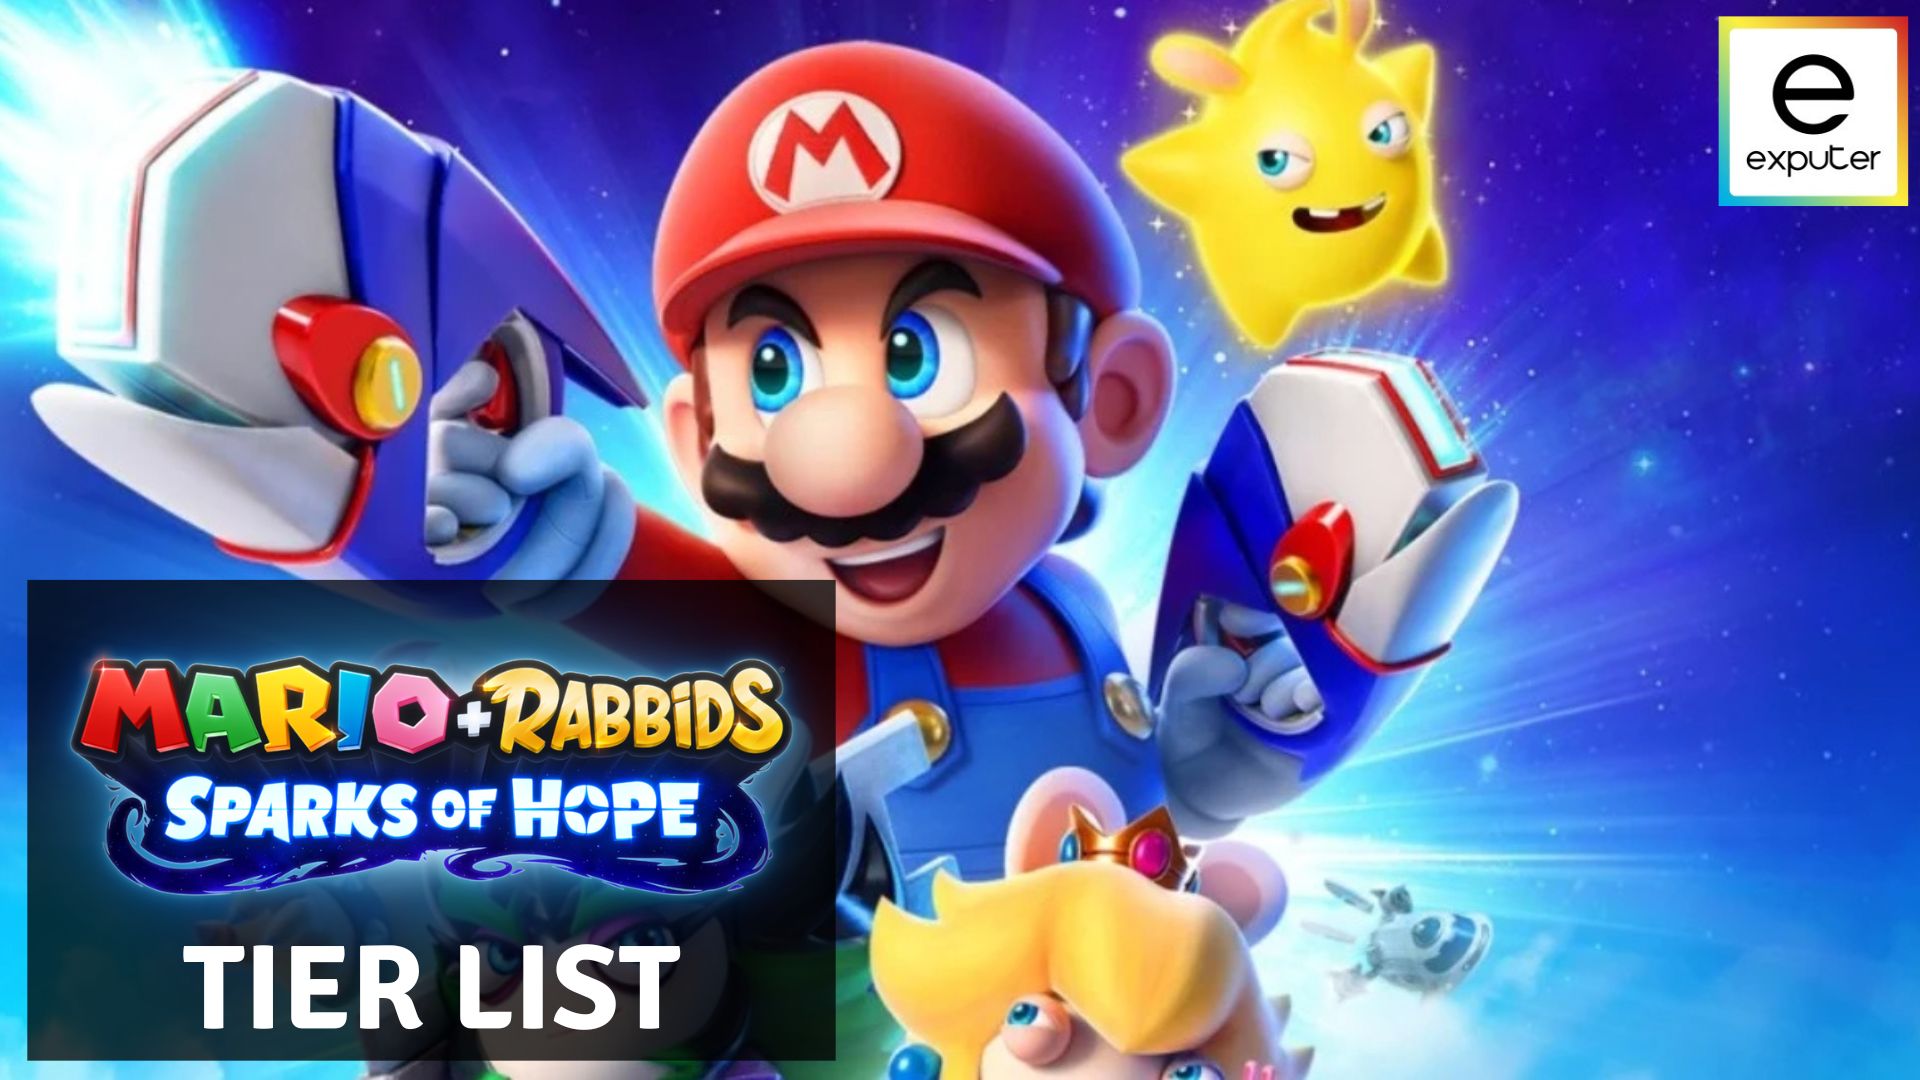 Mario Rabbids Sparks of Hope Tier List [All Characters Ranked]